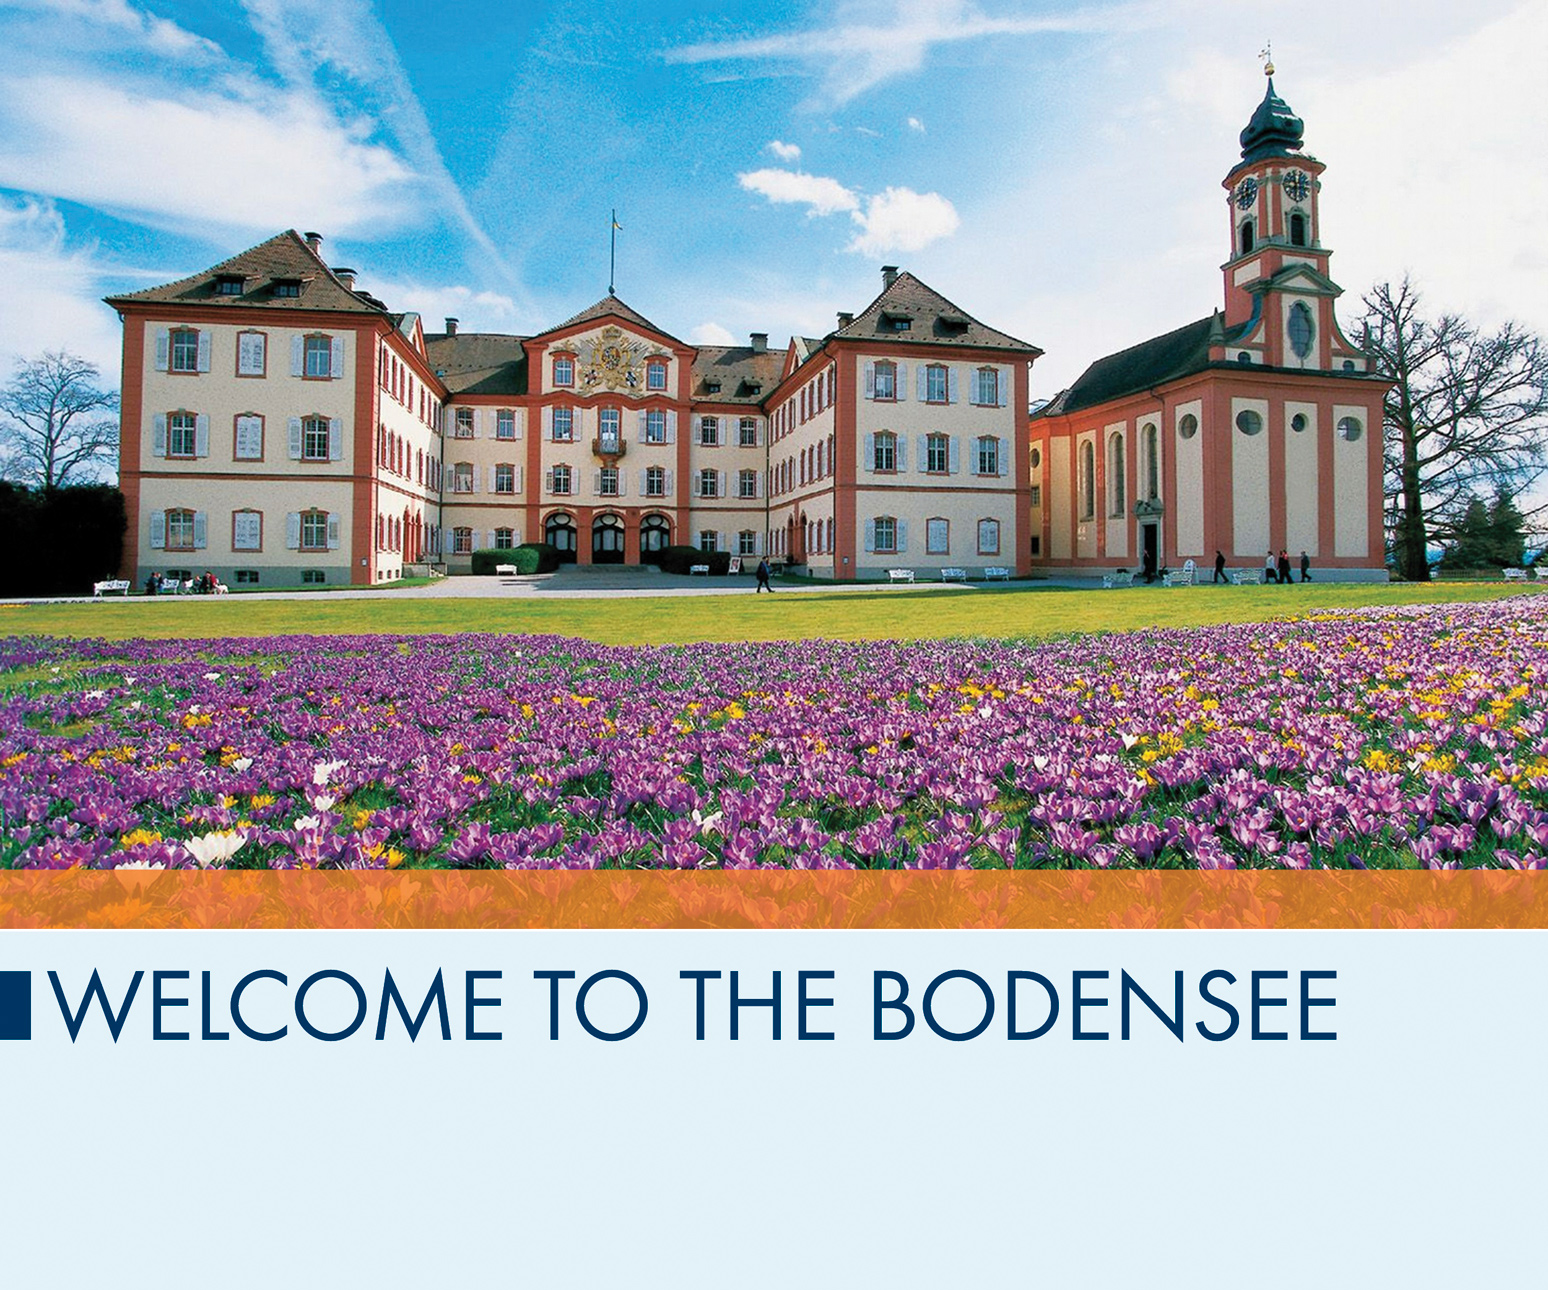 Welcome to the Bodensee